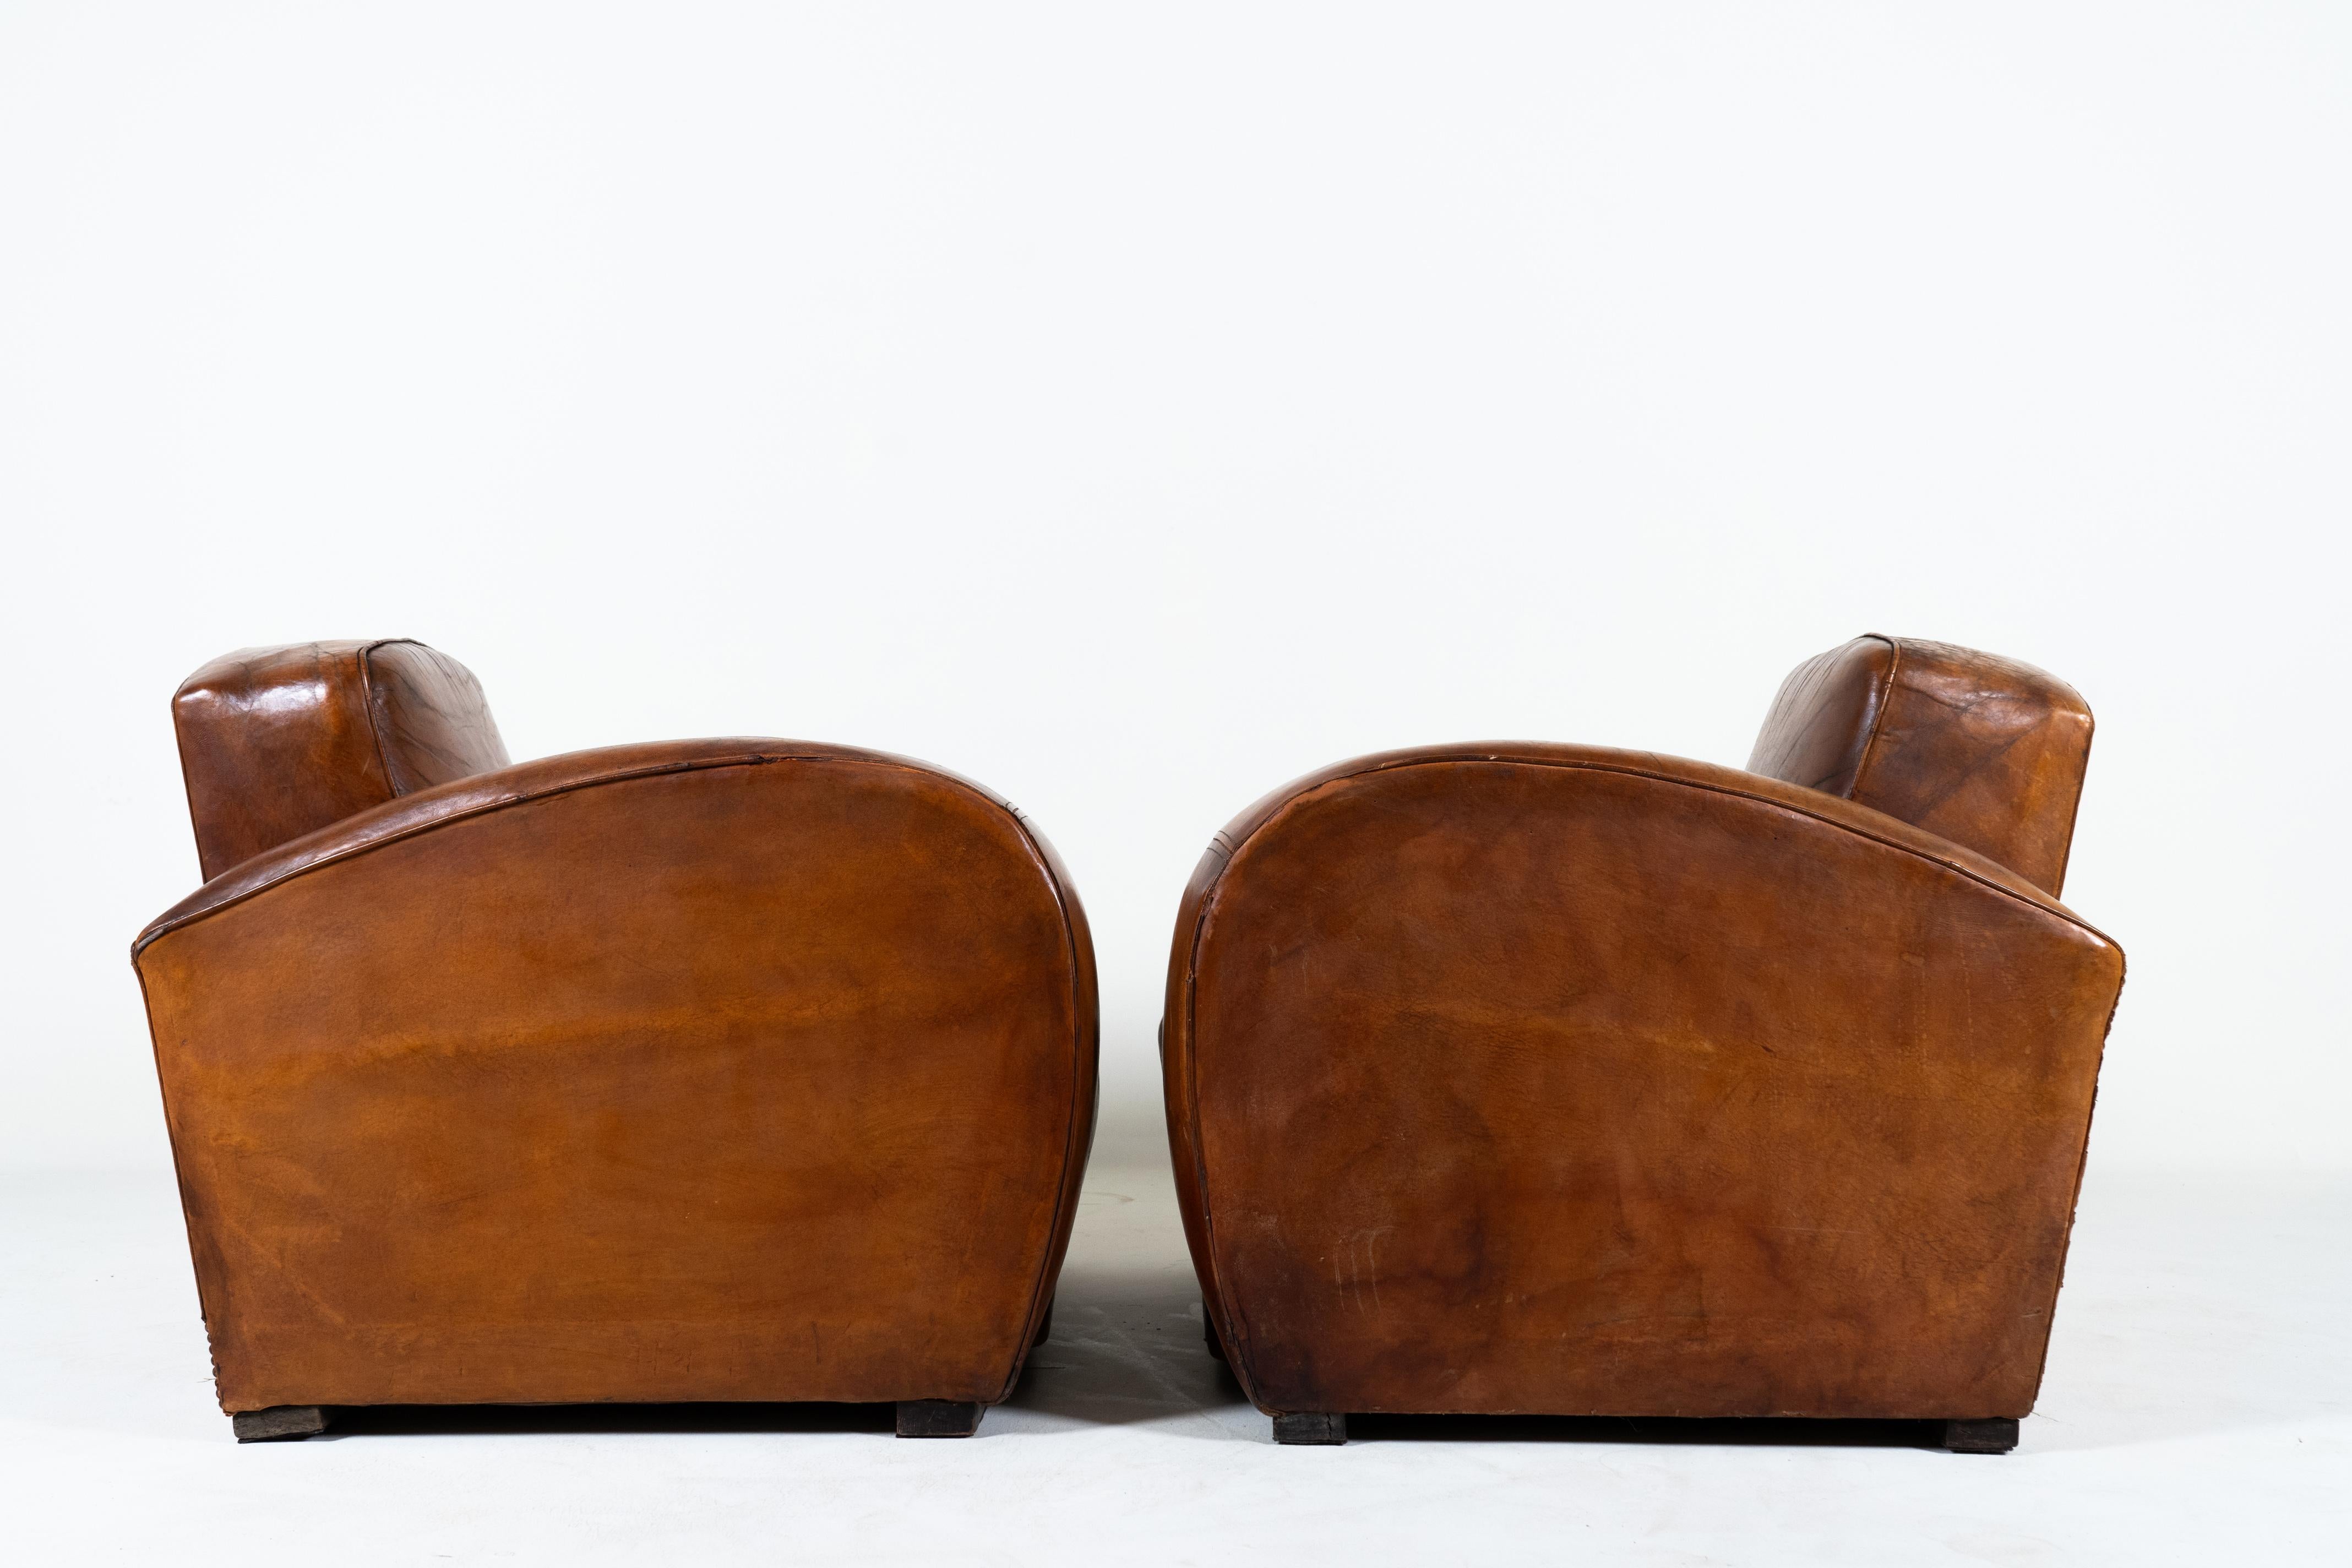 French A Pair of Art Deco Leather Club Chairs, France c.1930 For Sale